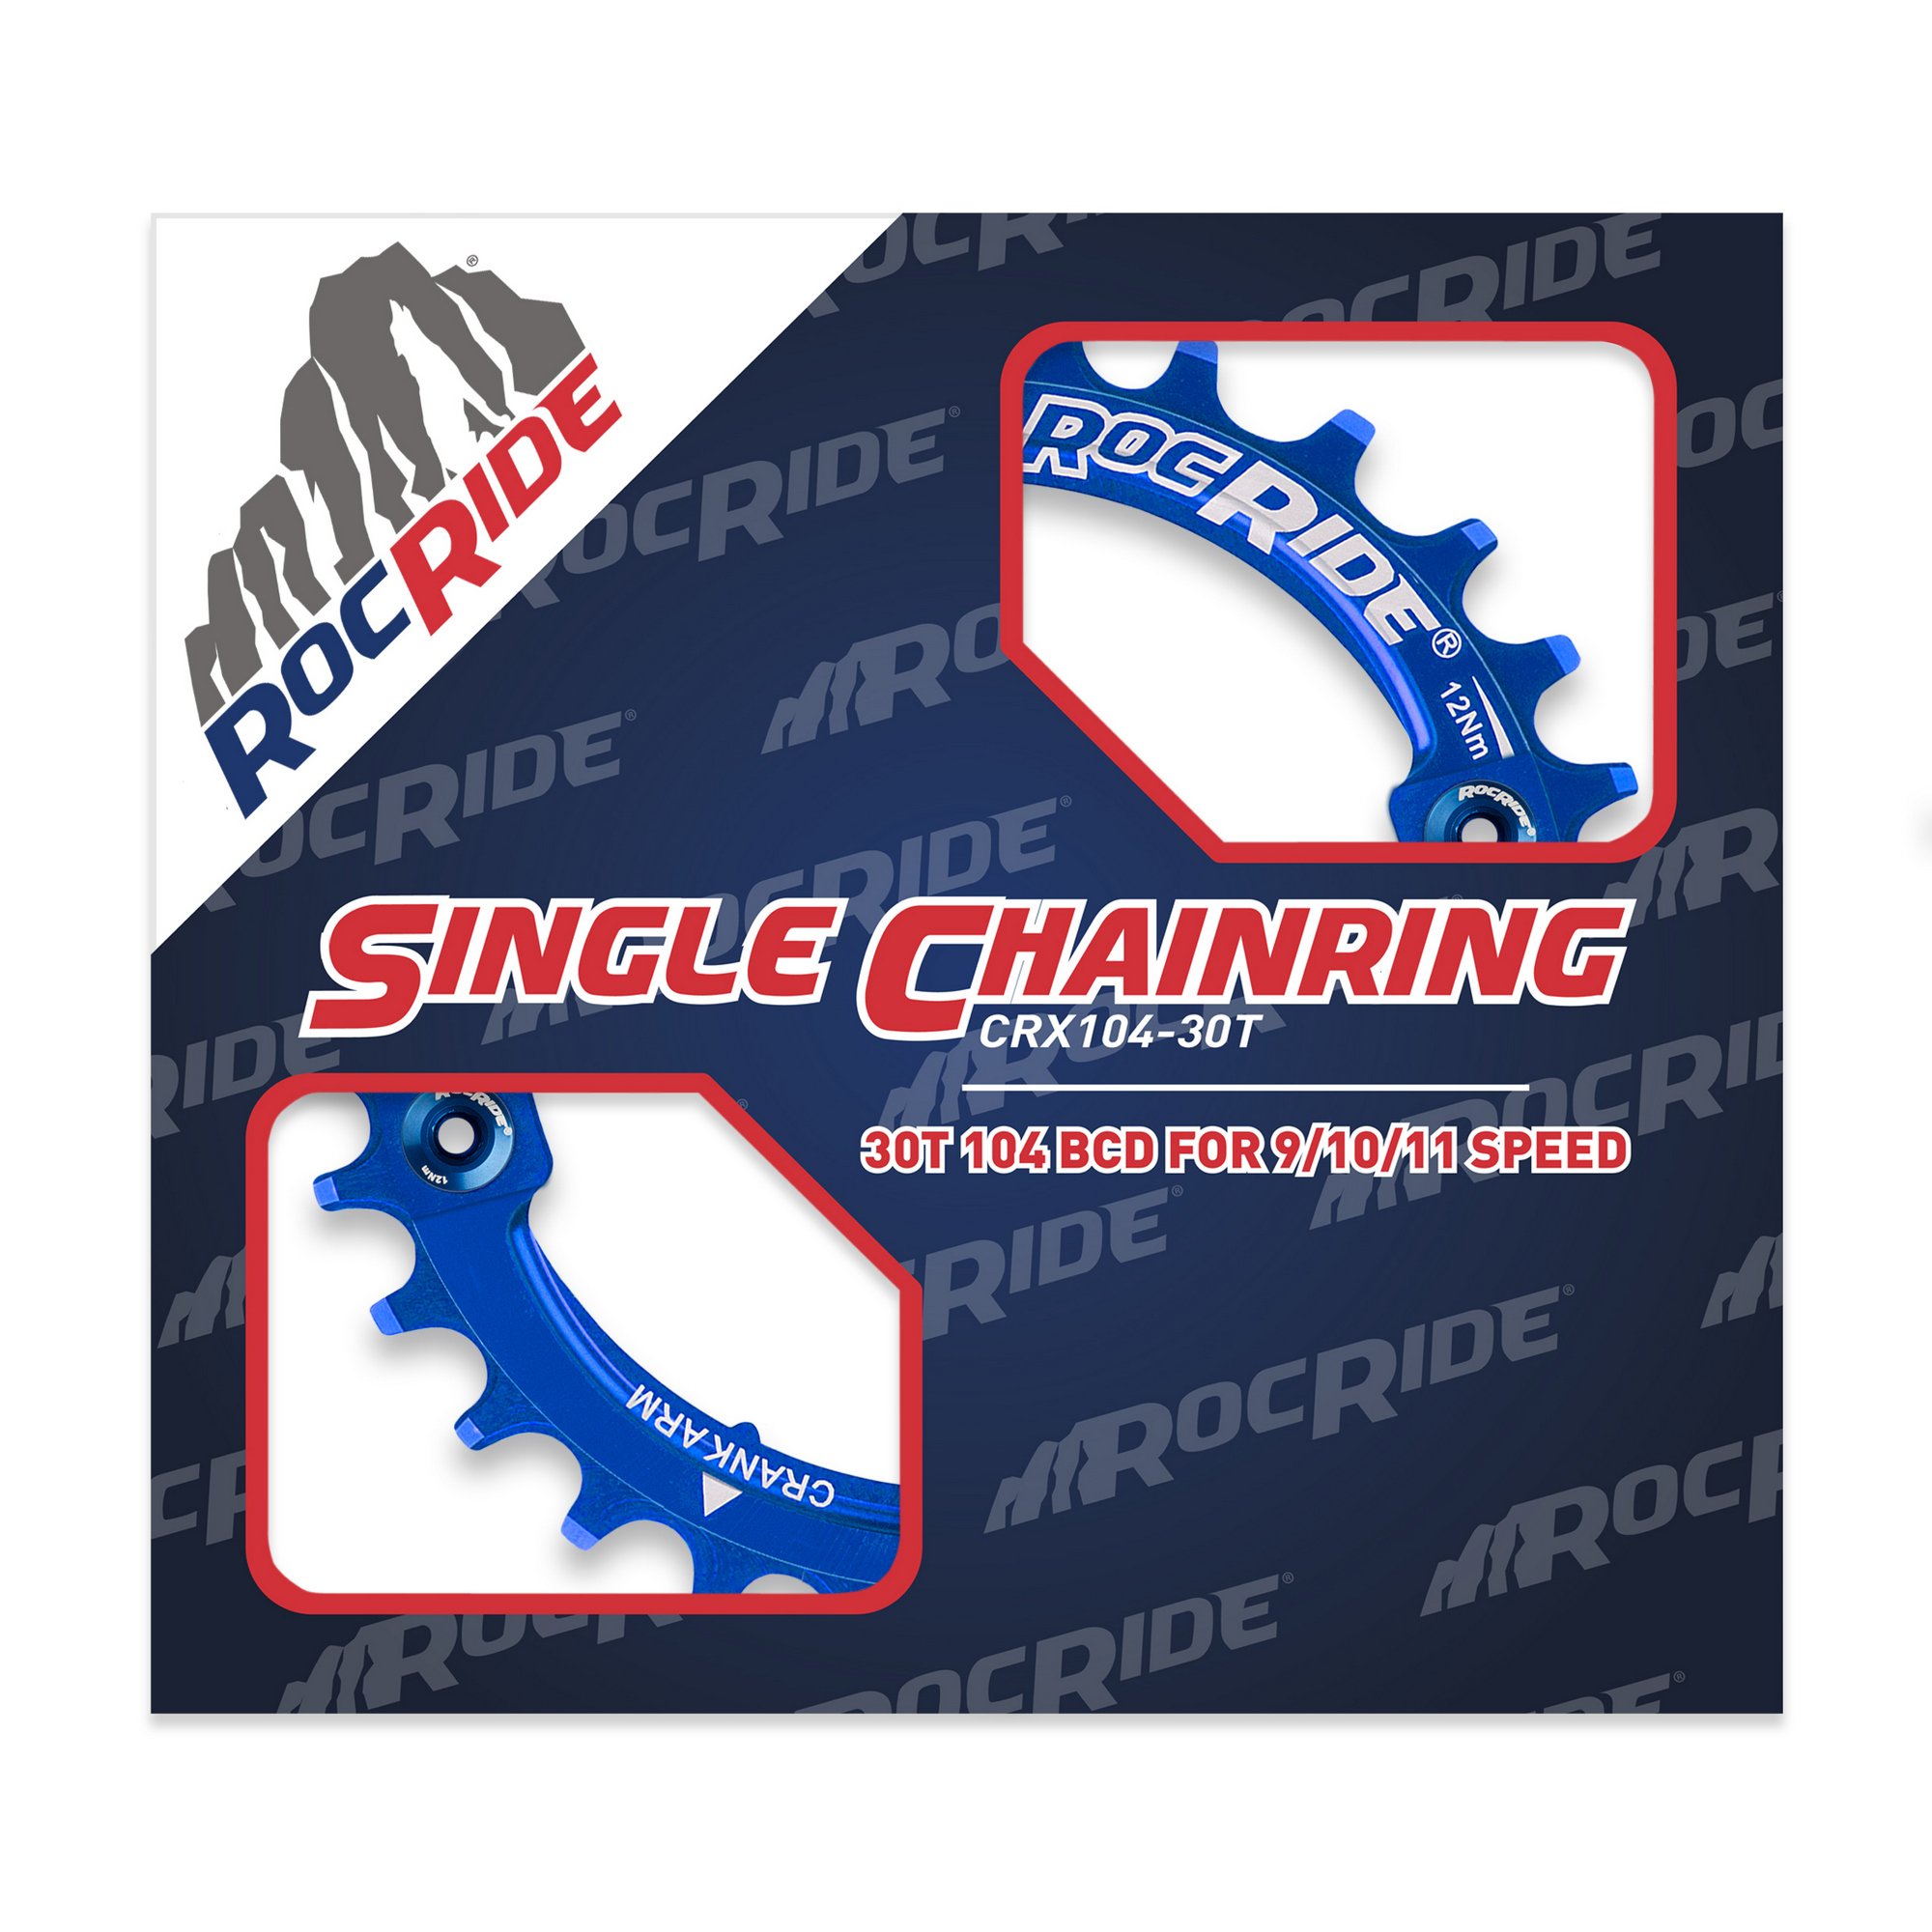 30T Narrow Wide Chainring 104 BCD Blue Aluminum With 4 Blue Aluminum Bolts By RocRide For 9/10/11 Speed. - image 2 of 5